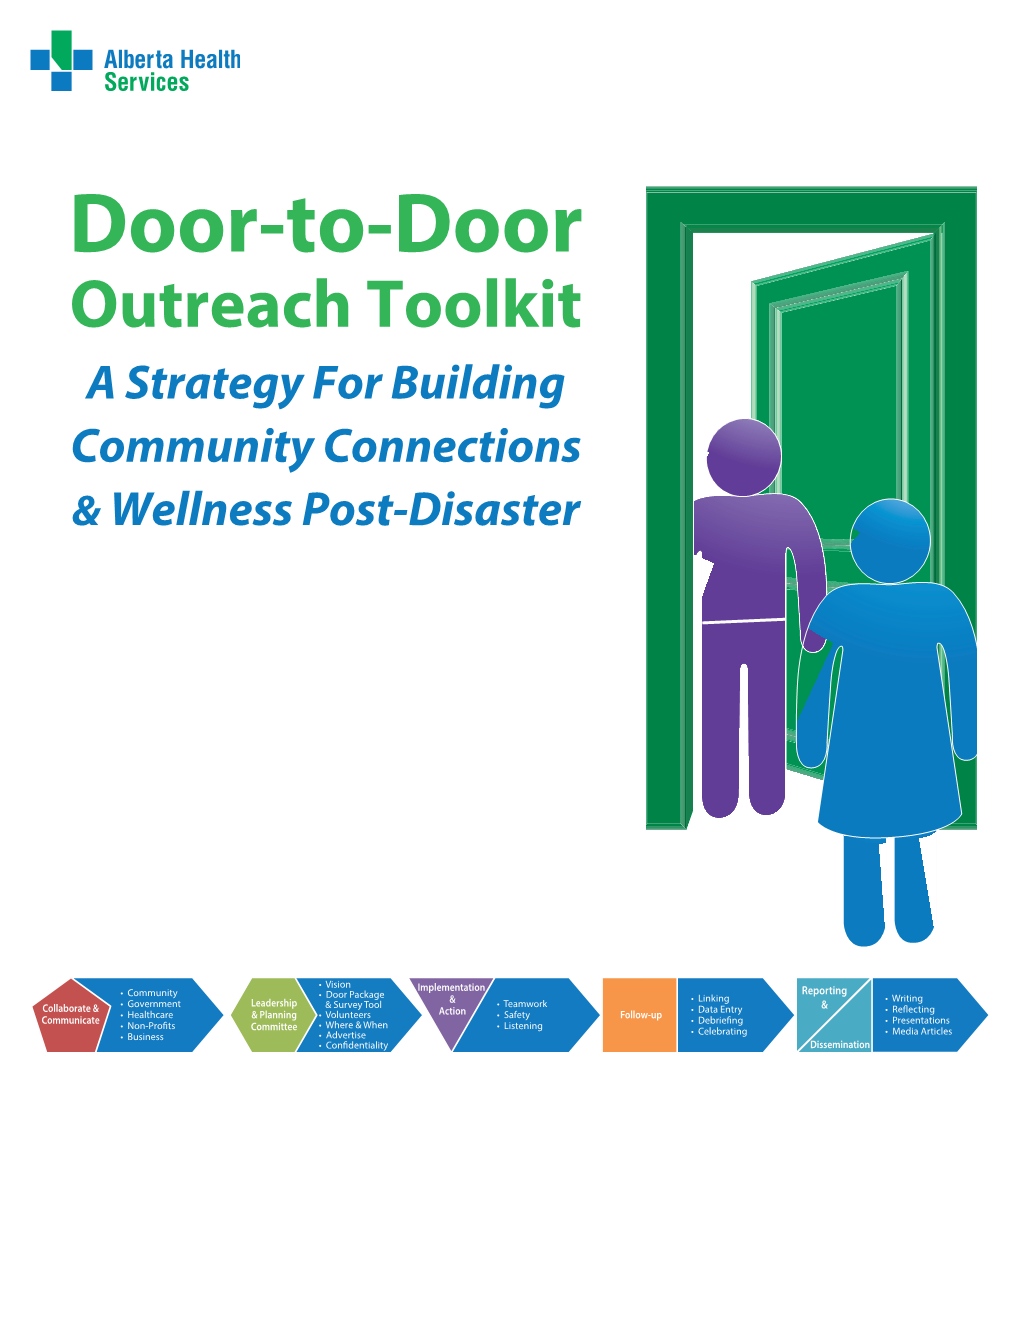 Outreach Toolkit a Strategy for Building Community Connections & Wellness Post-Disaster